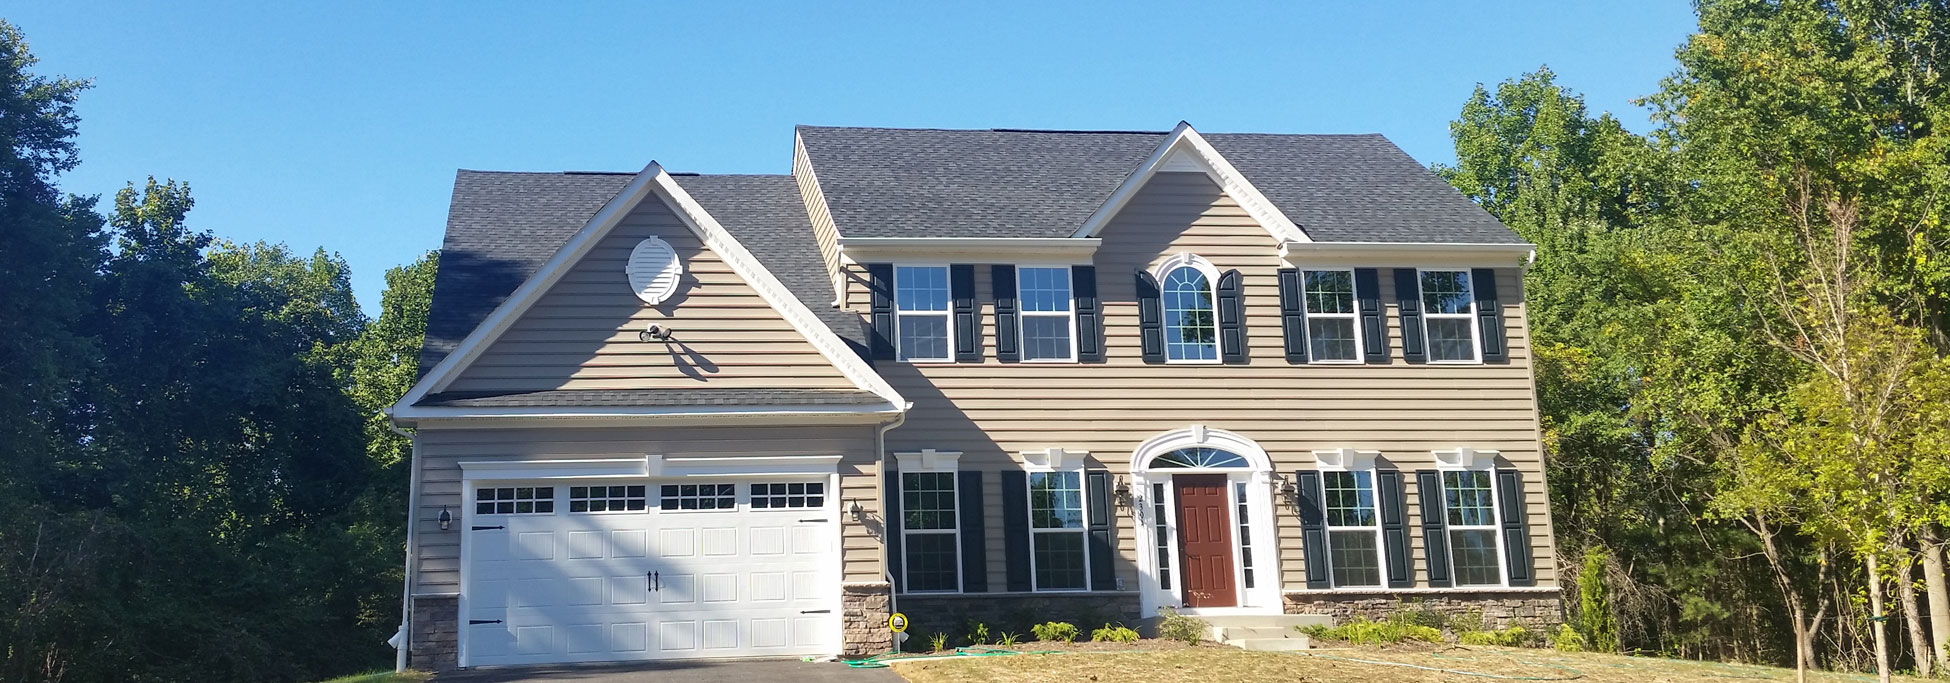 The Different Types of Vinyl Siding | Topper Construction
